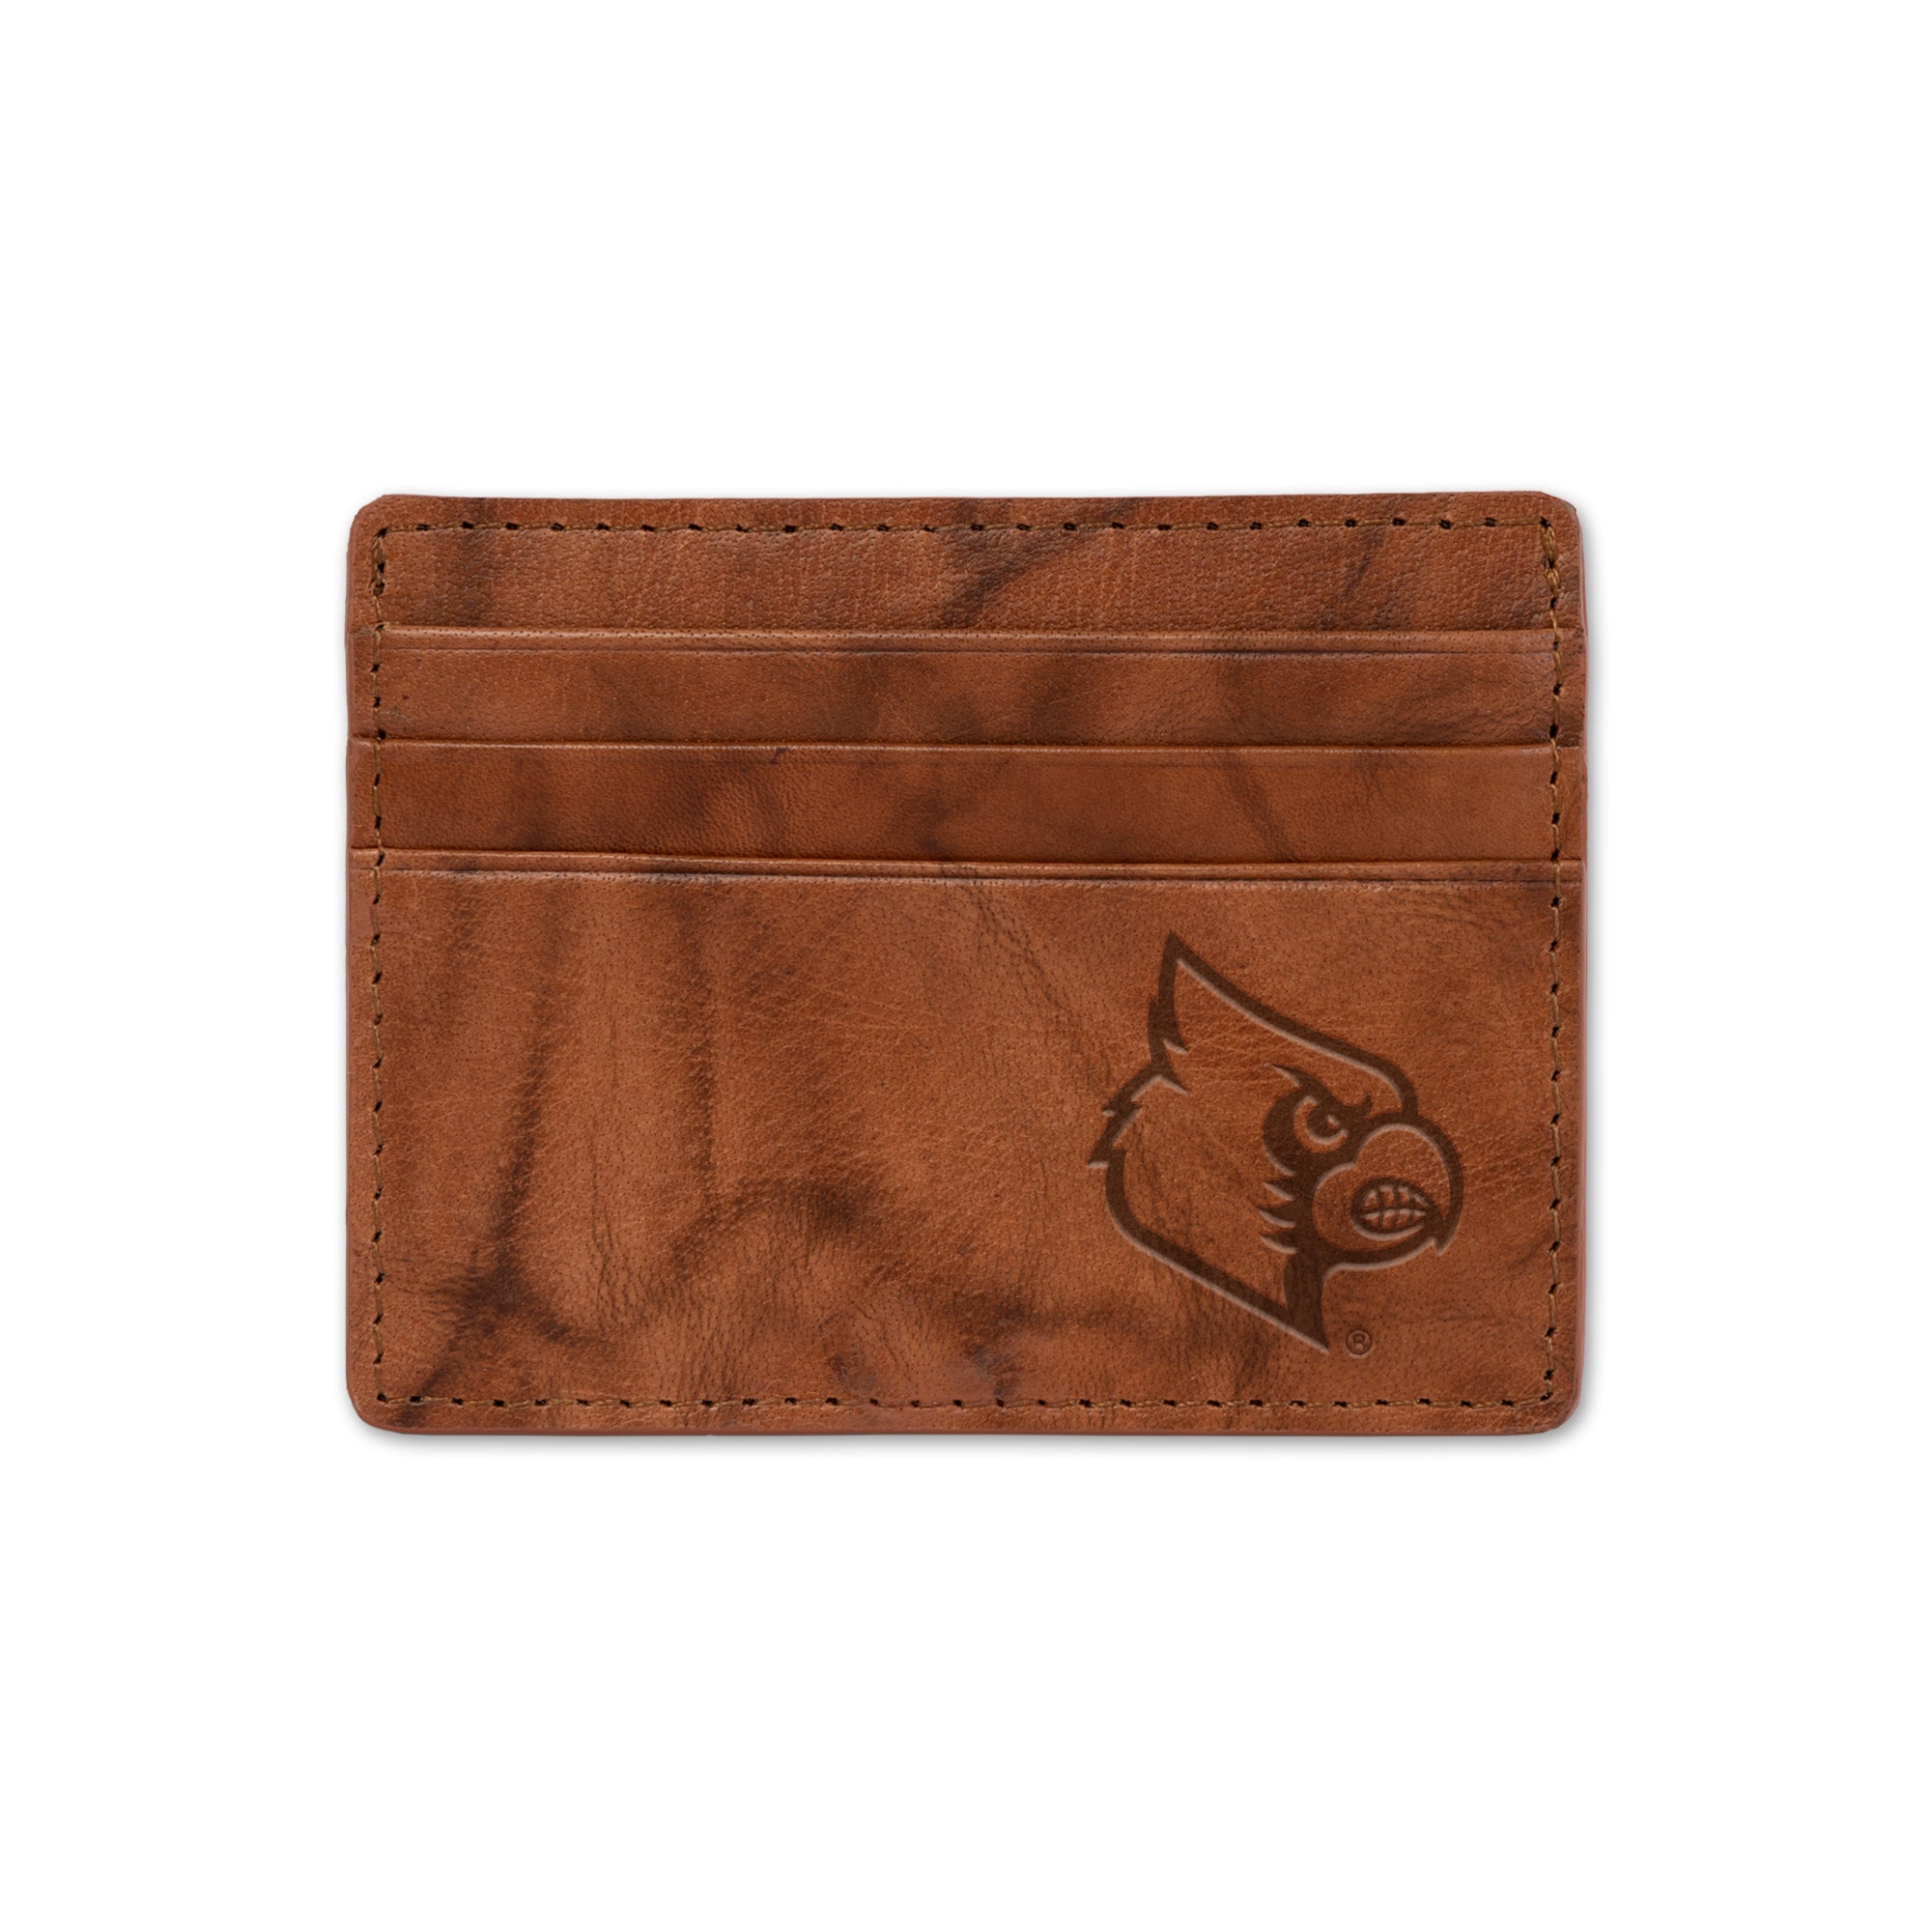 Louisville Cardinals NCAA Embroidered Leather Billfold Wallet